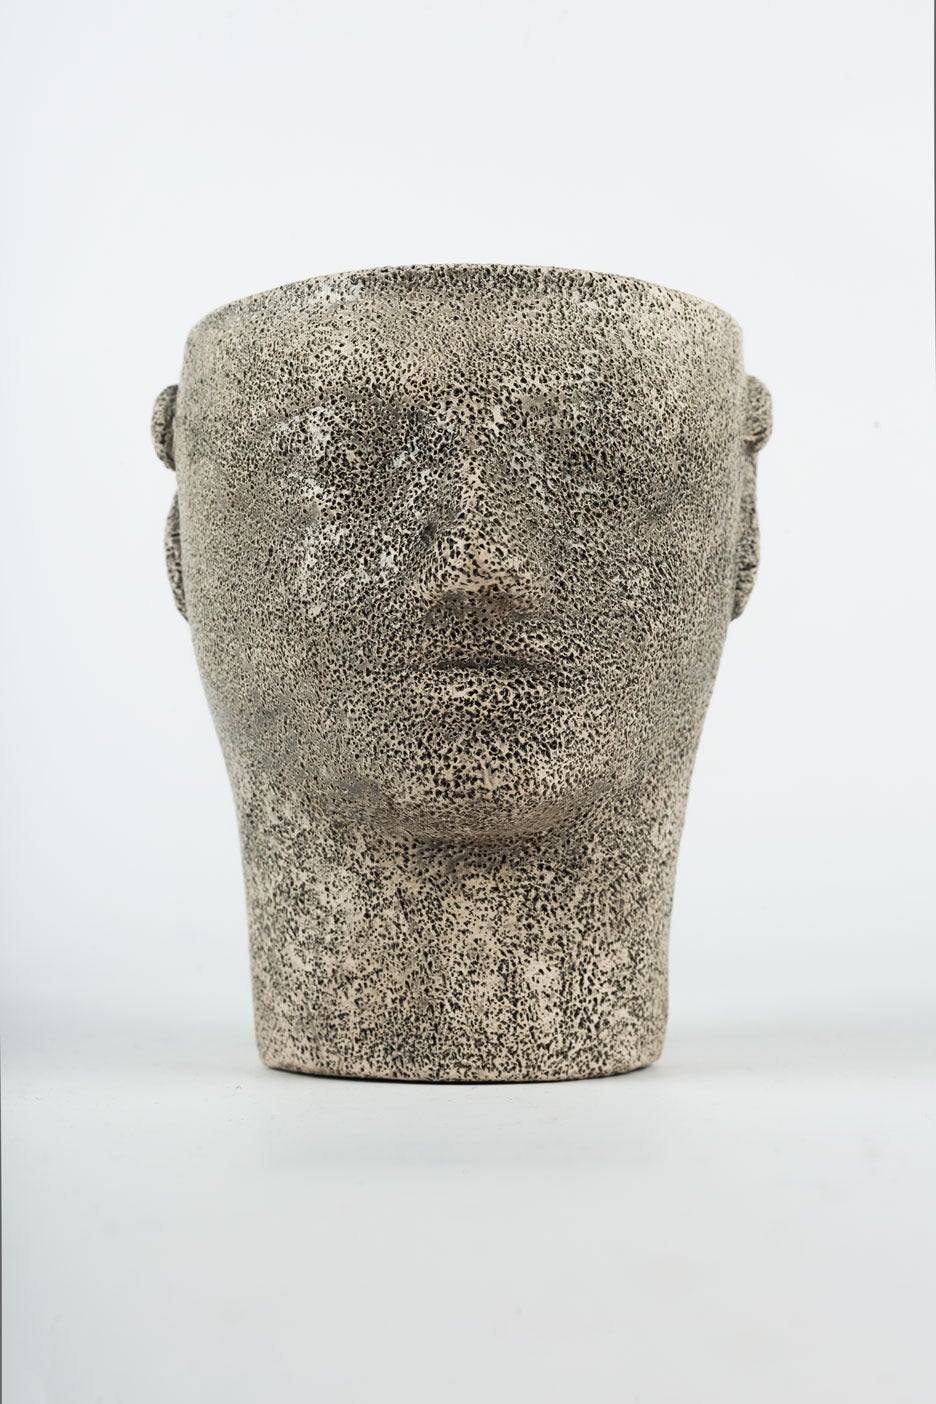 Brutalist Pottery Head Cup by Francis Triay, White Red Glaze Inside, France 1970 1